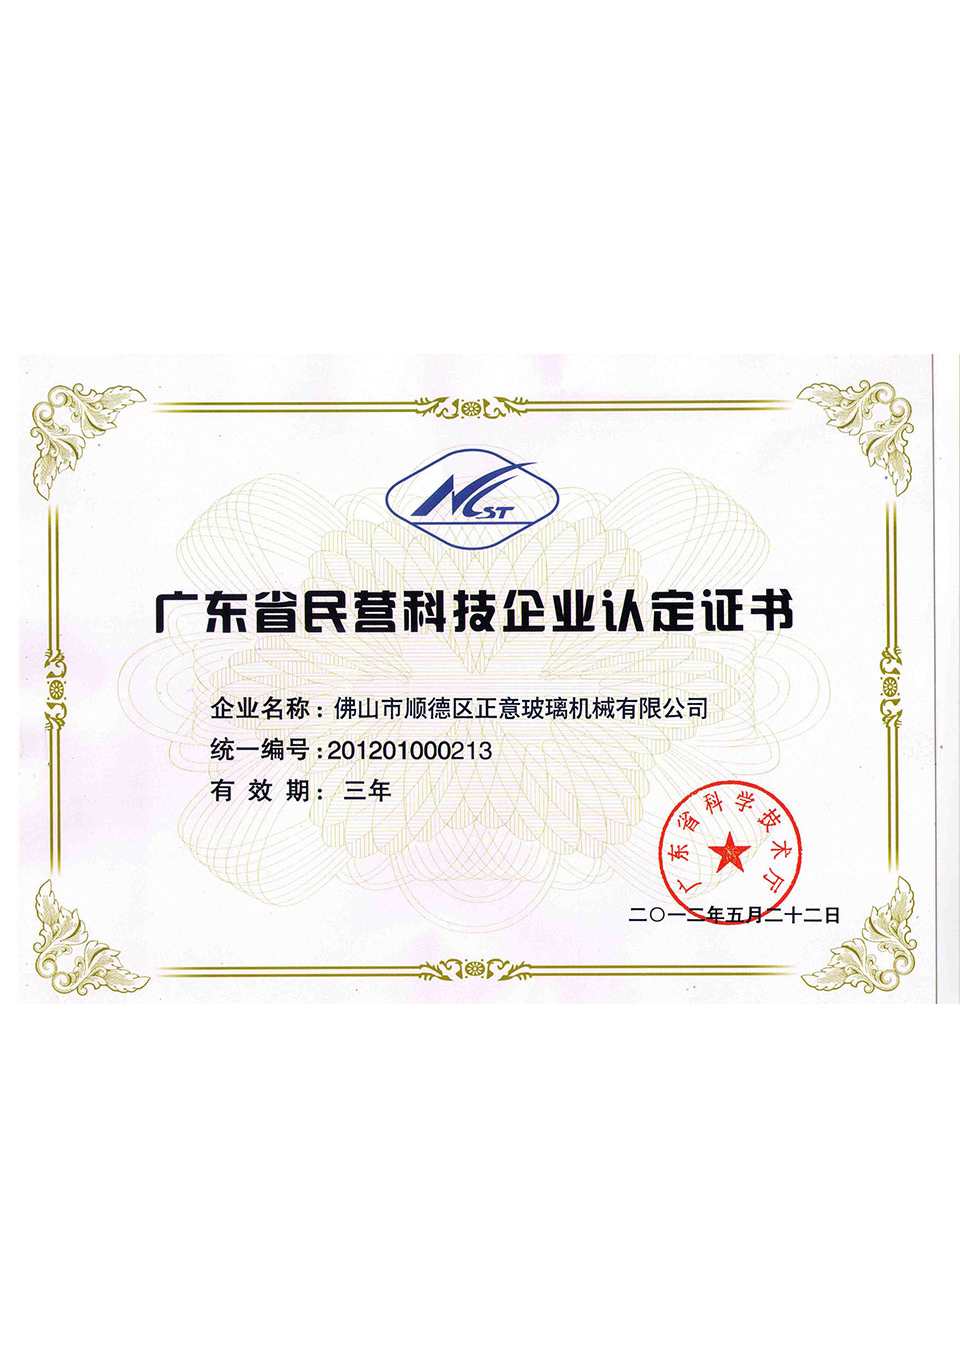 Guangdong Private Technology Enterprise